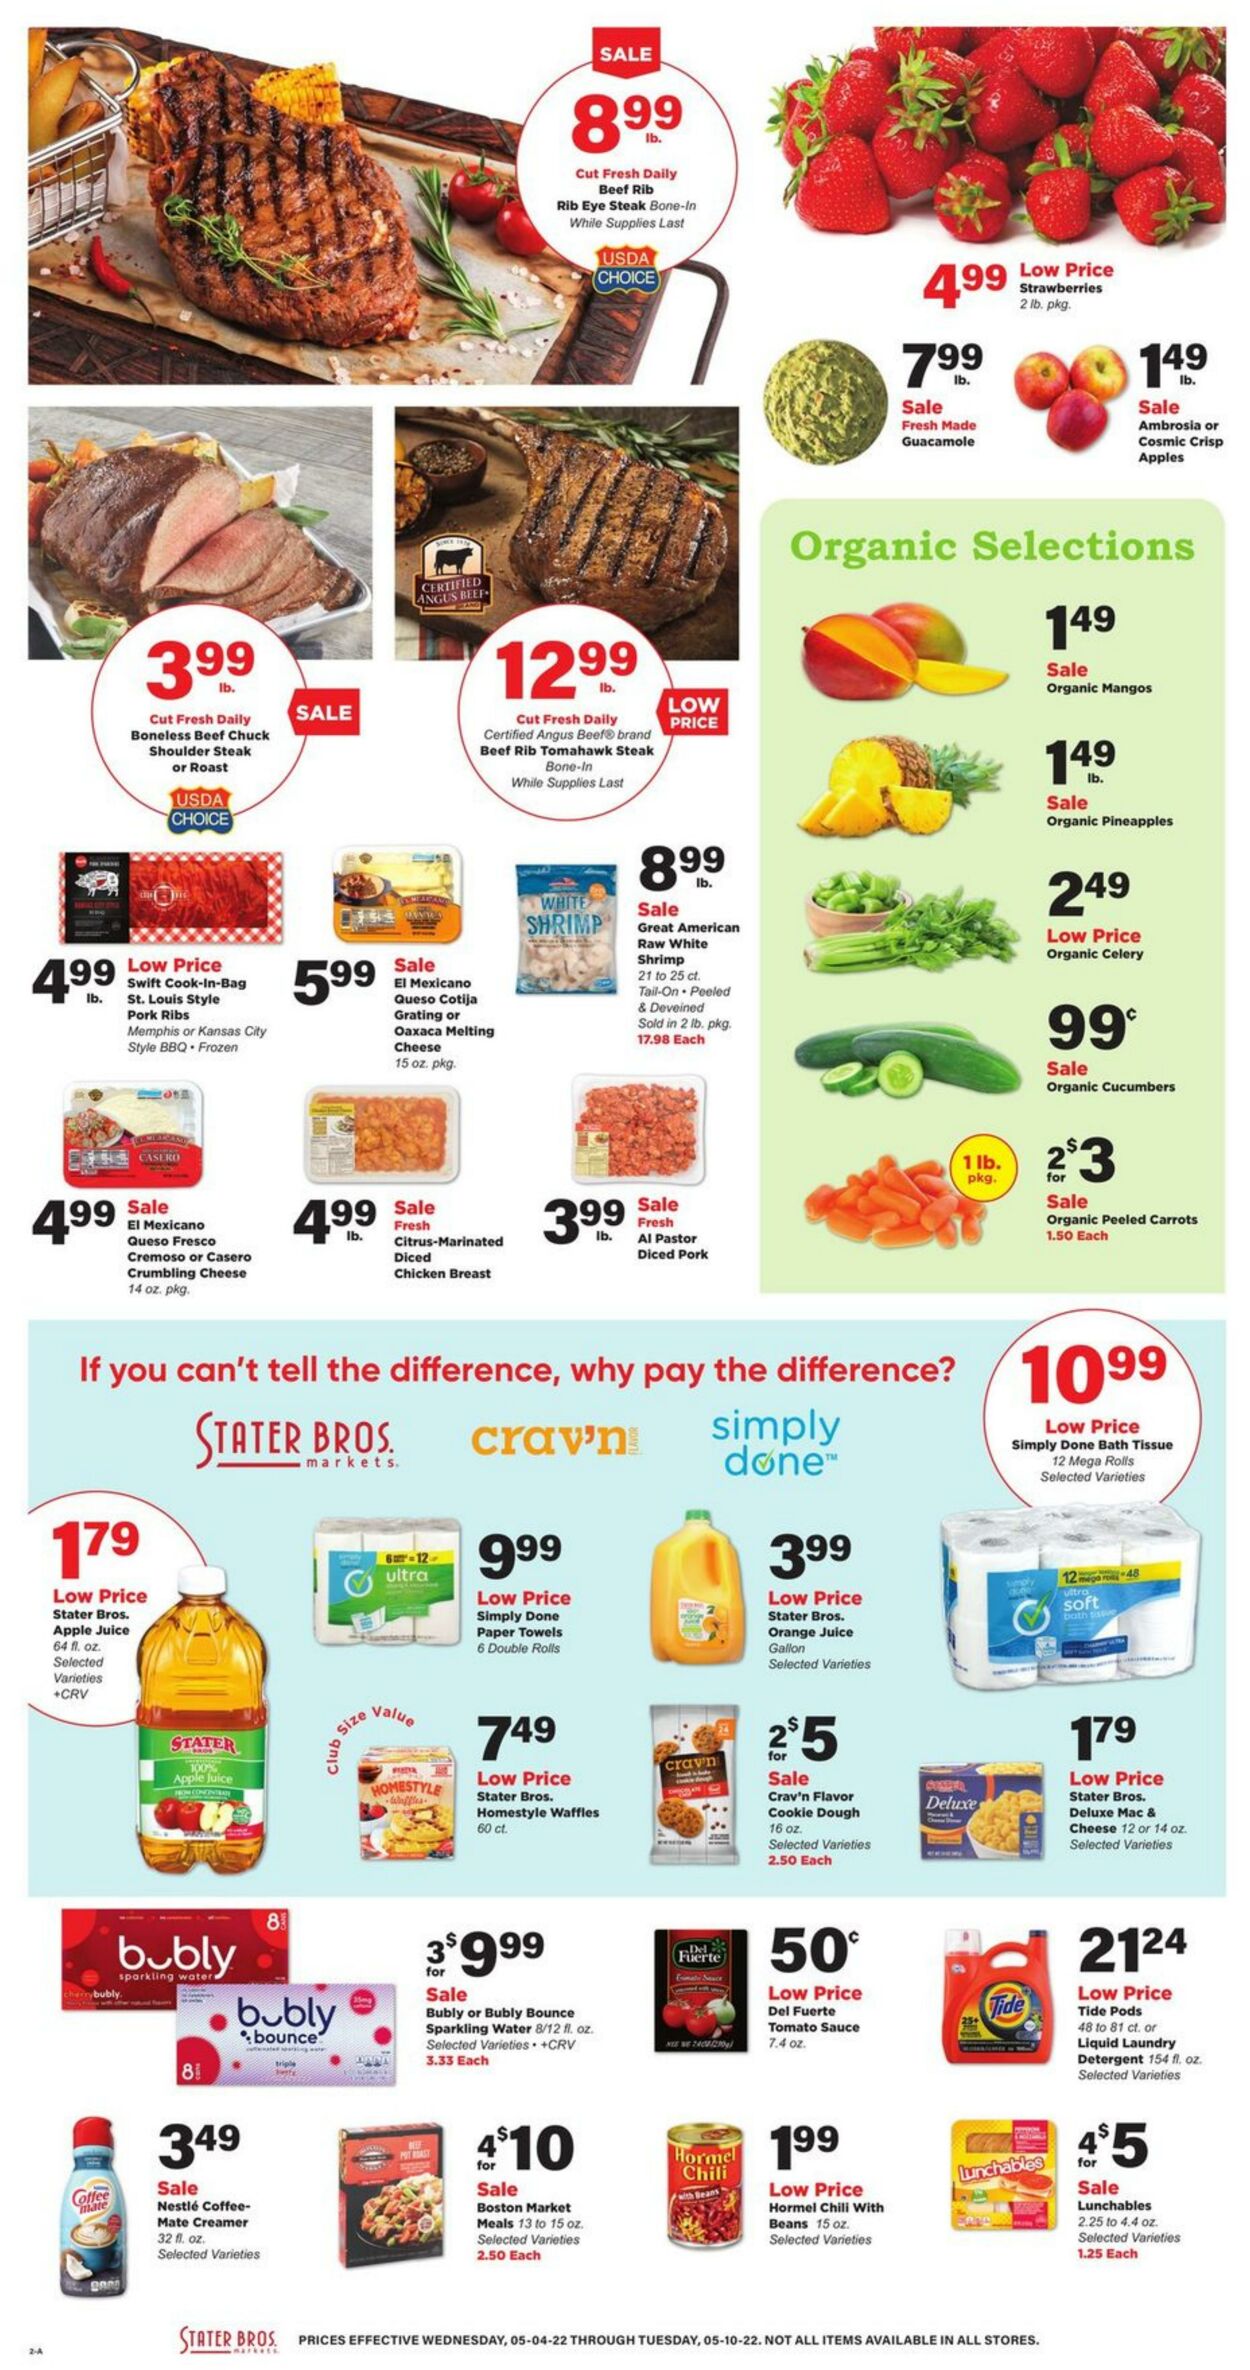 Weekly ad Stater Bros 05/04/2022 - 05/10/2022